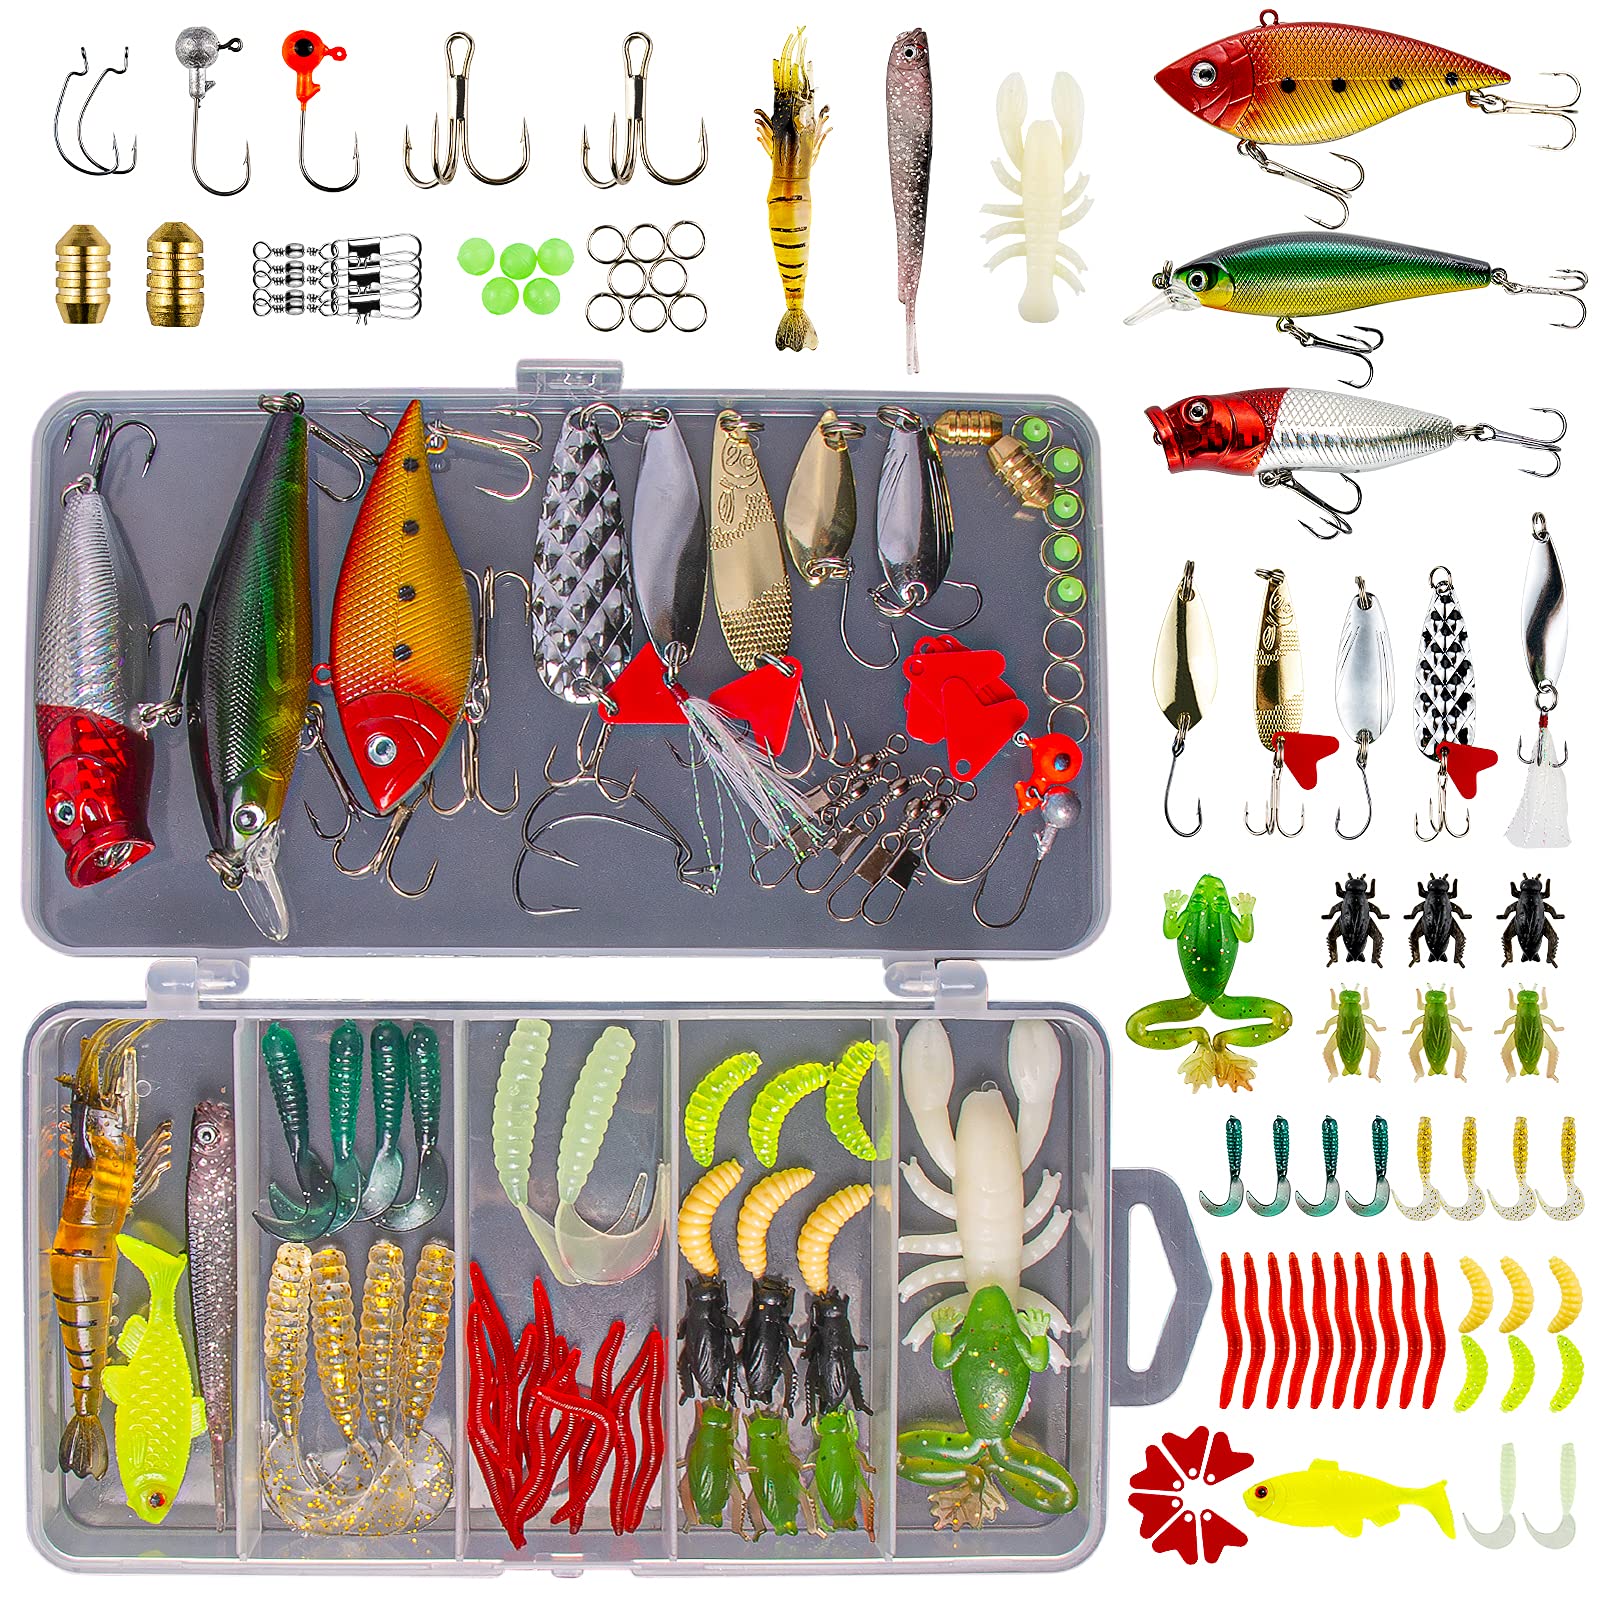 Soft Fishing Lures Kit Fishing Lures Baits Tackle Set for Freshwater Trout  Bass Salmon Include Vivid Spinner Baits swim bait